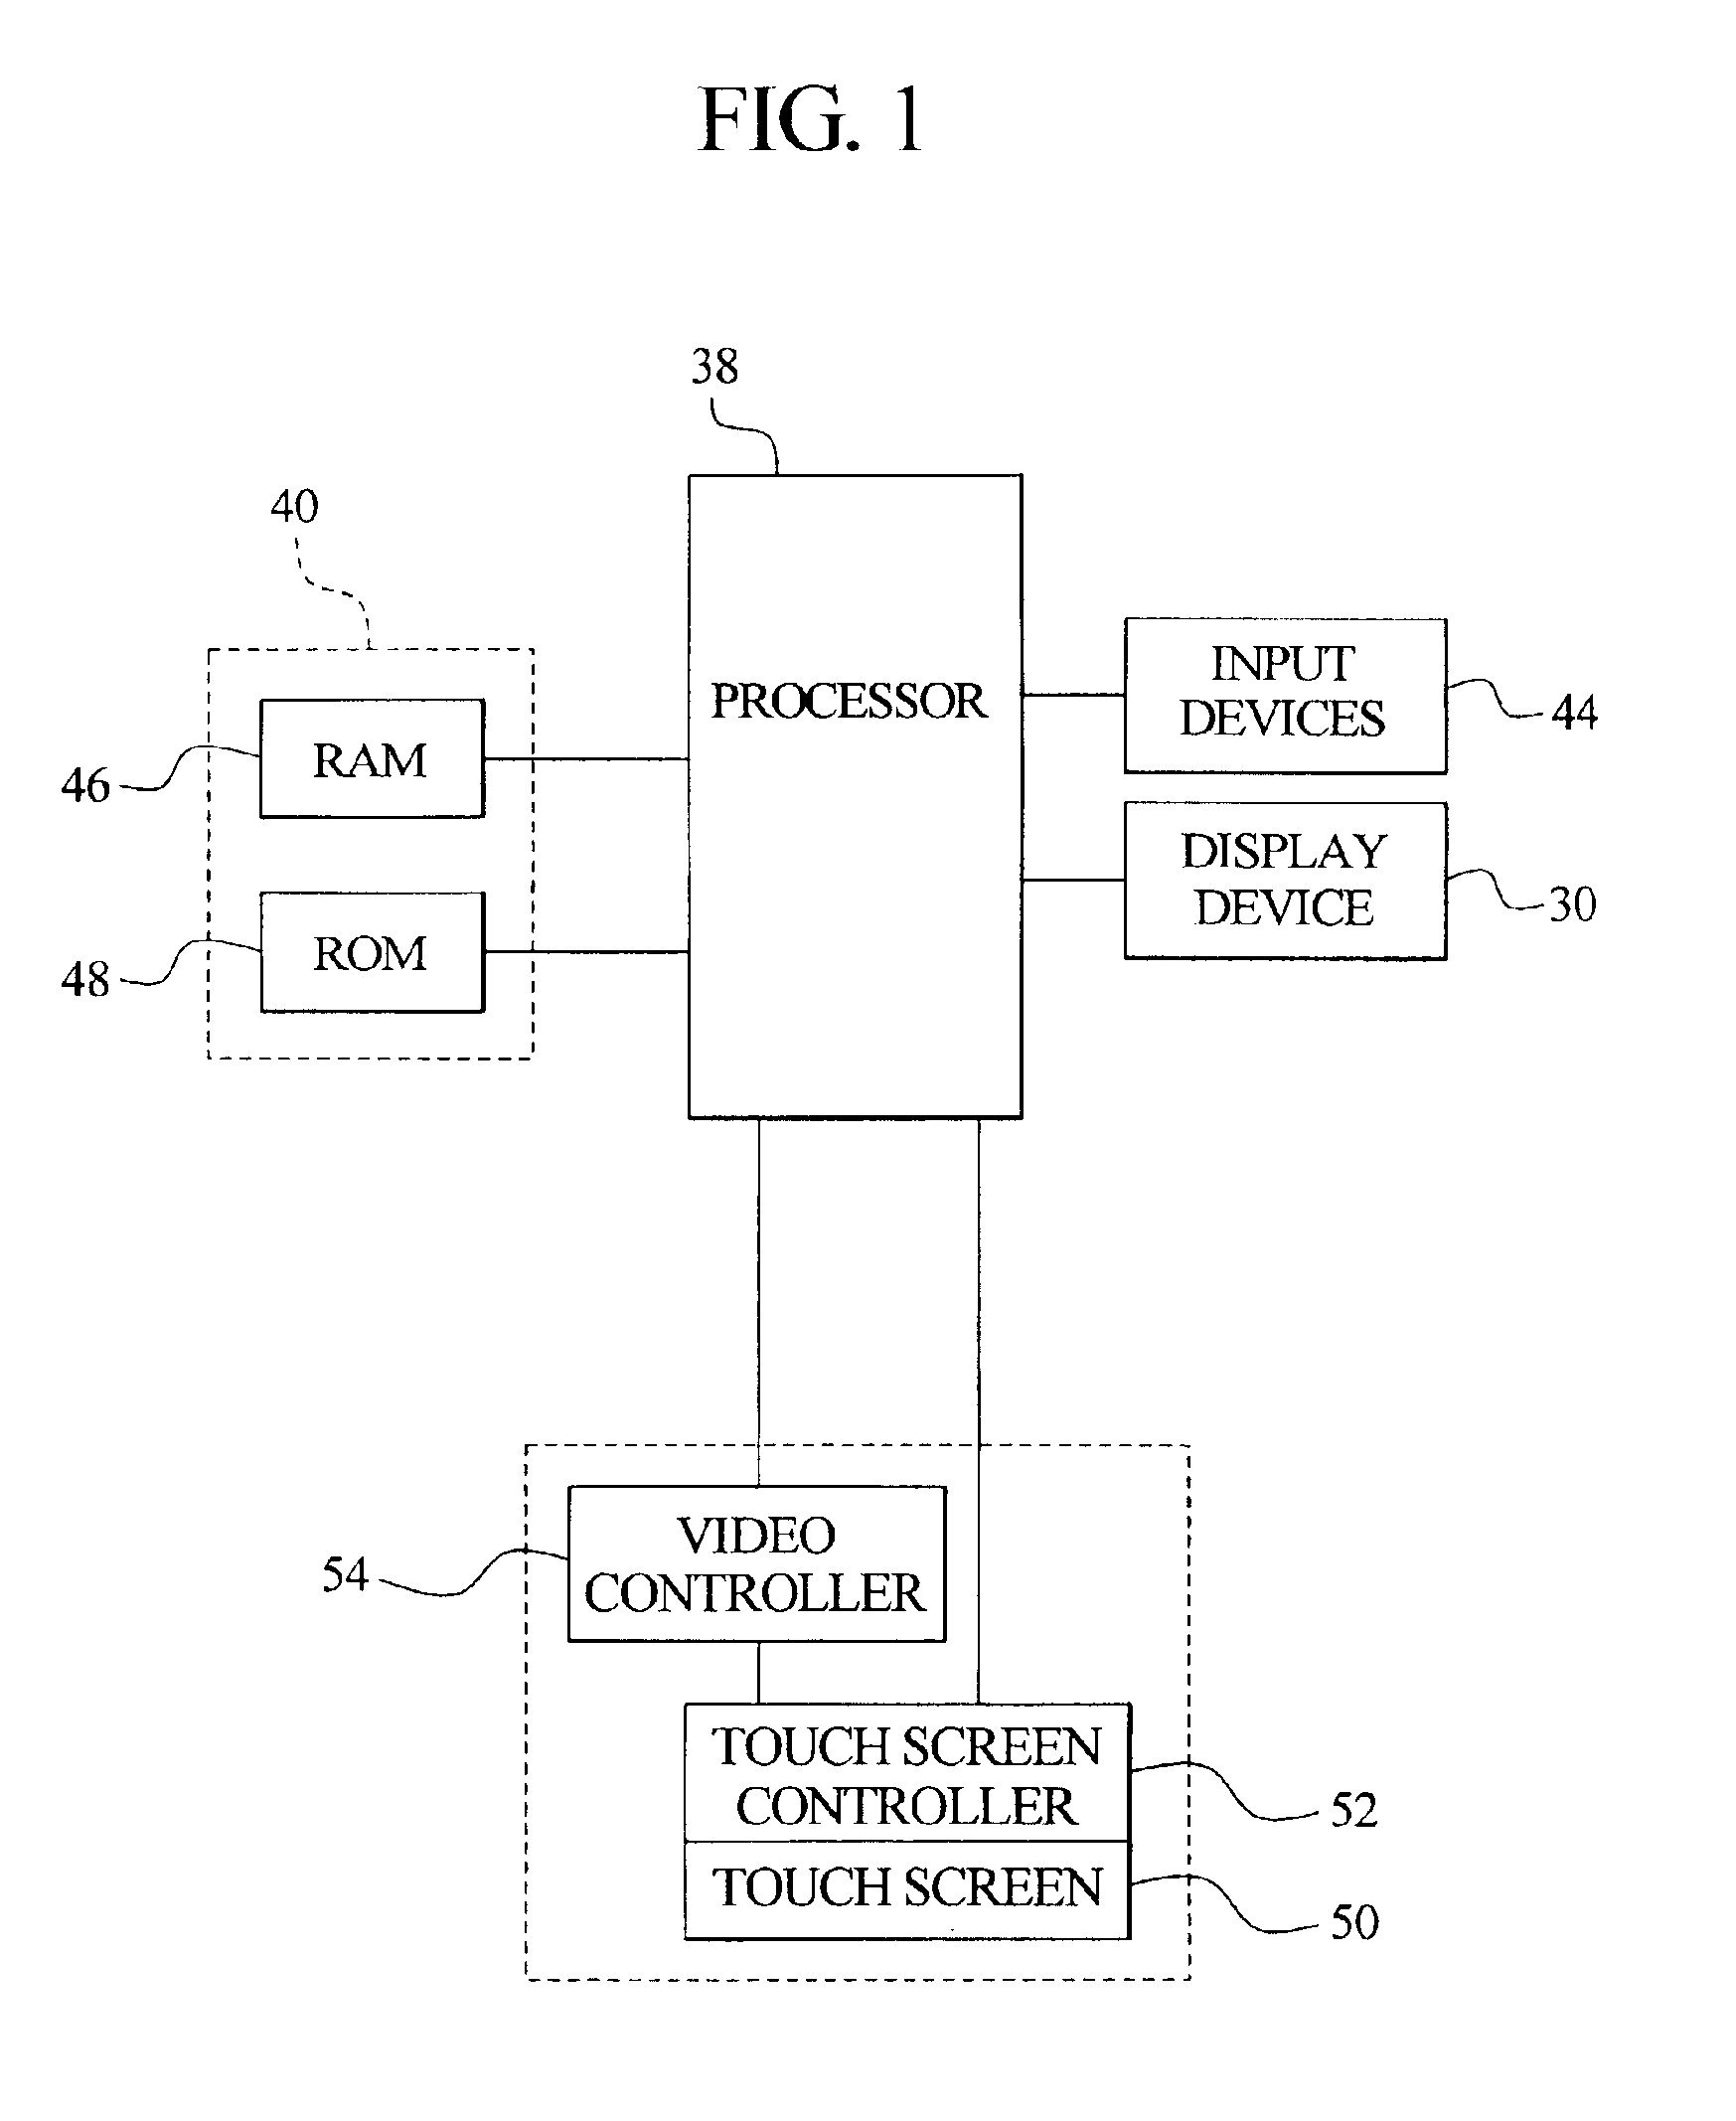 Apparatus and method for generating a pool of seeds for a central determination gaming system